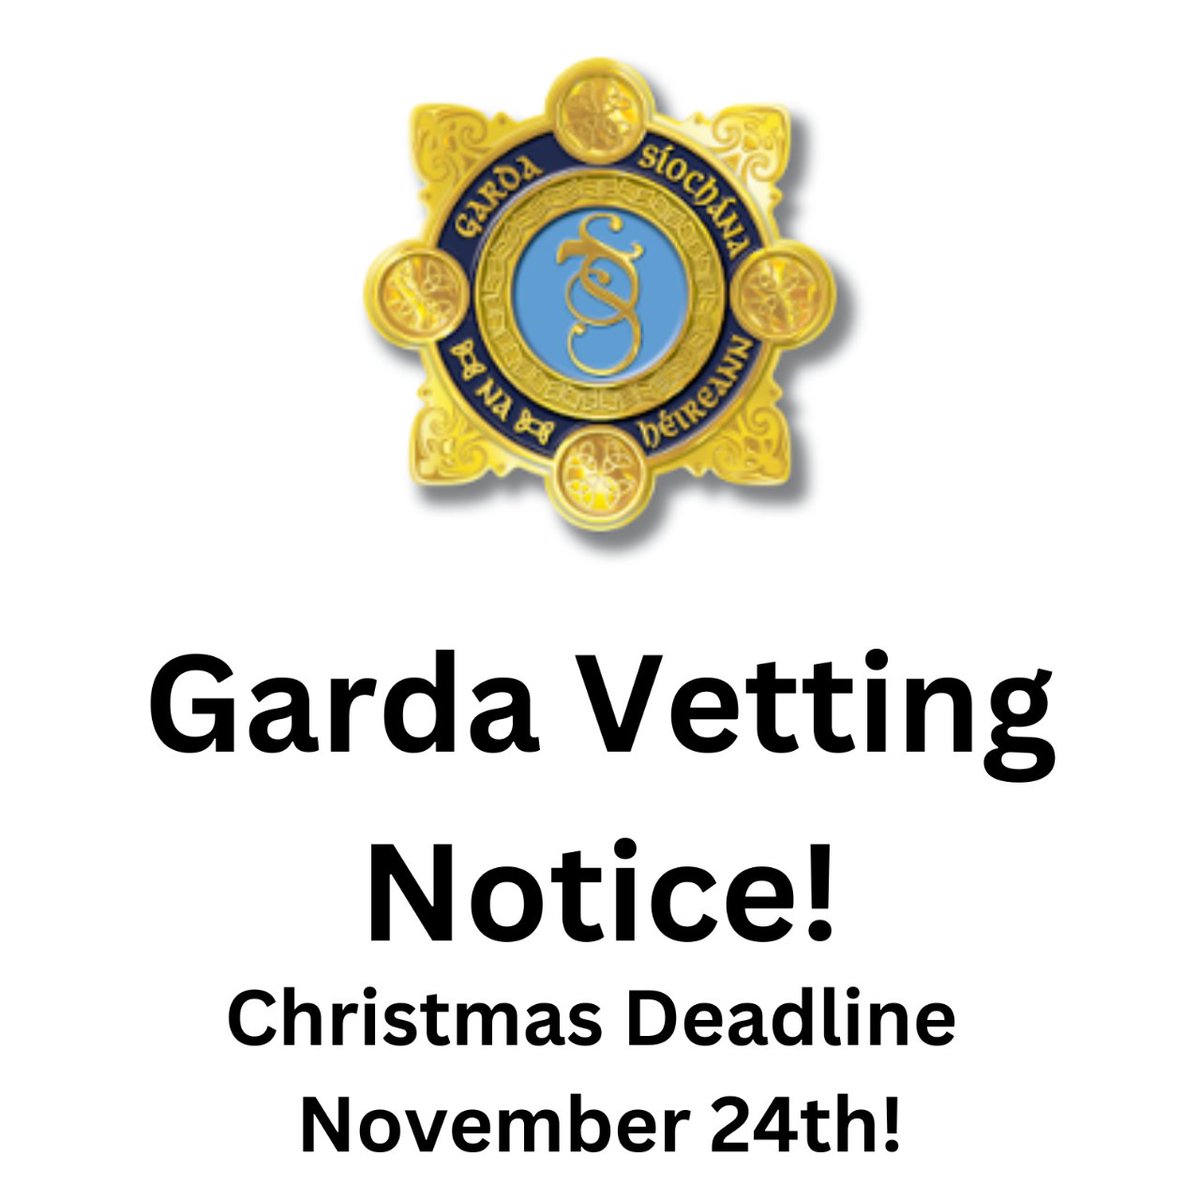 Christmas Deadline November 24th. The Garda Vetting Consortium will close for Christmas in a few weeks so if any Youth Theatres would like anyone vetted for December or January they have to get them in by next week to allow time for processing.